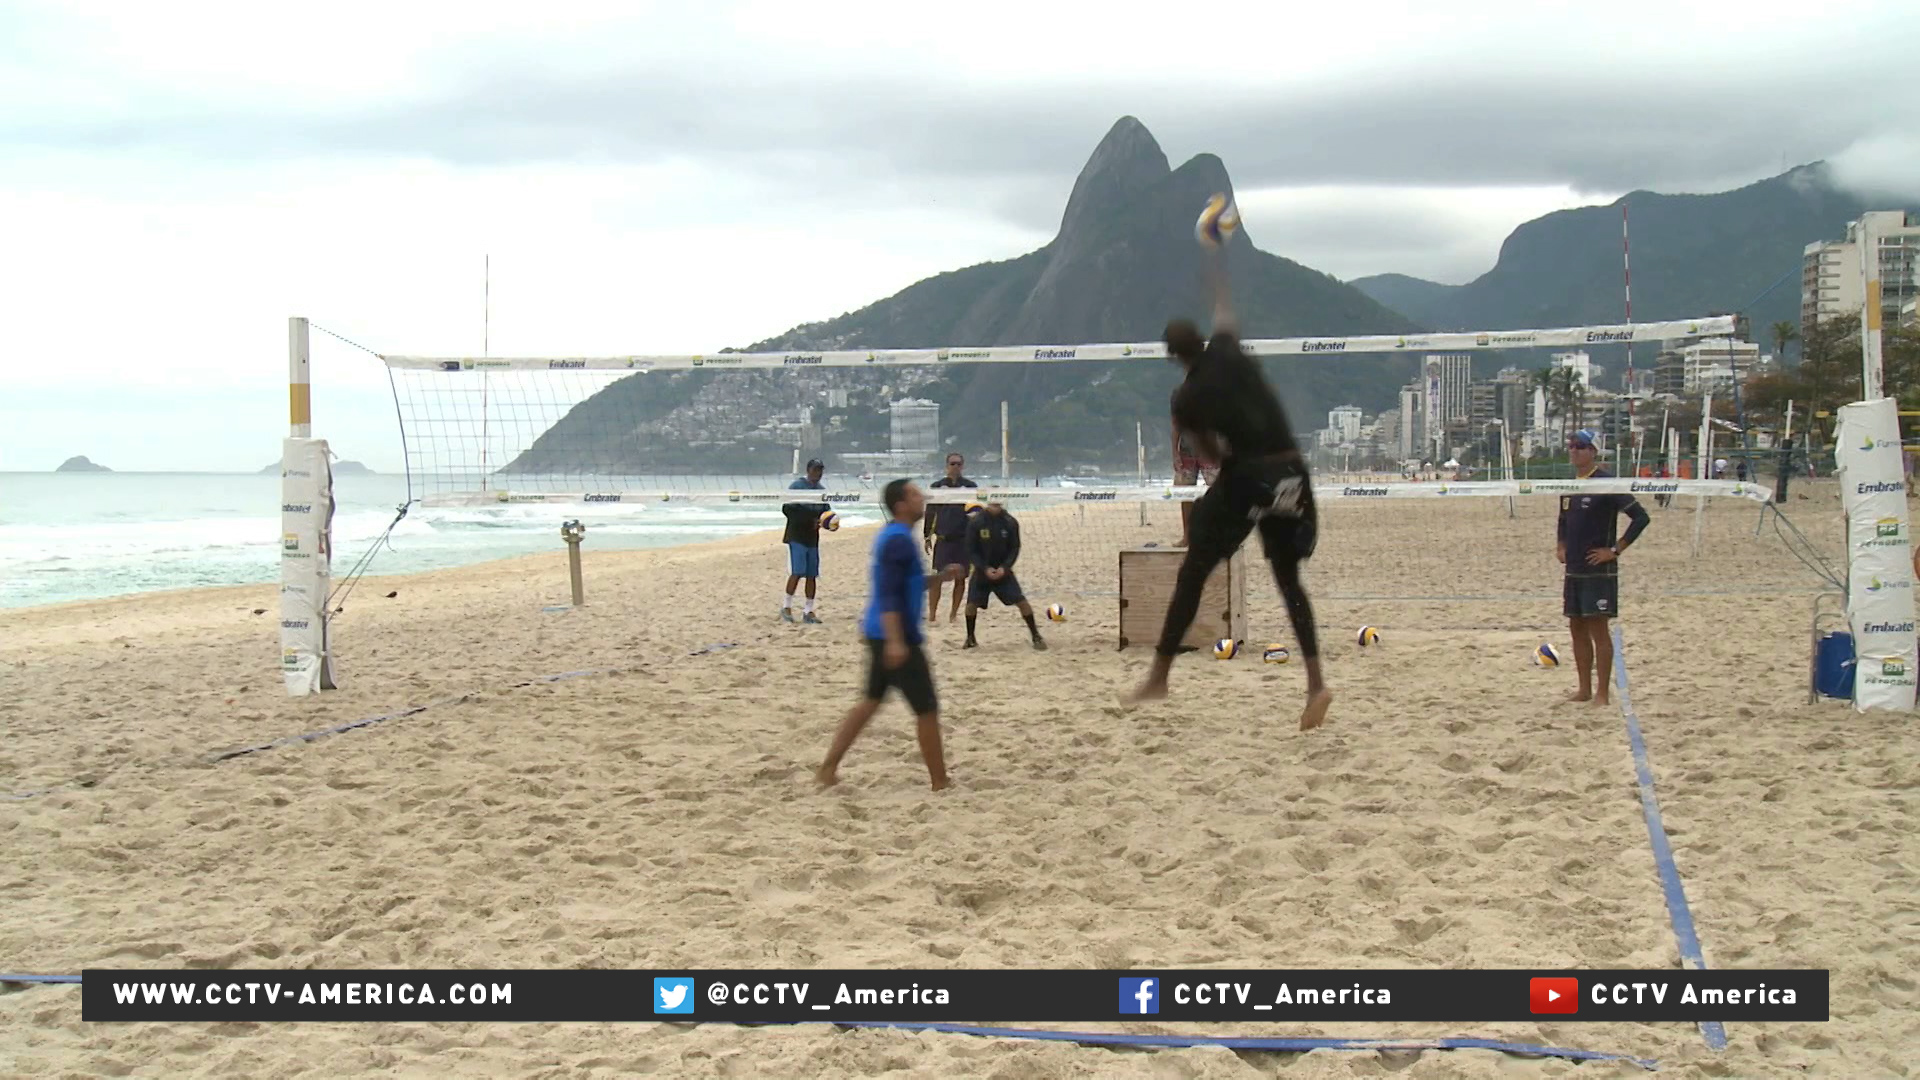 Brazil expected to shine at Olympics beach volleyball games